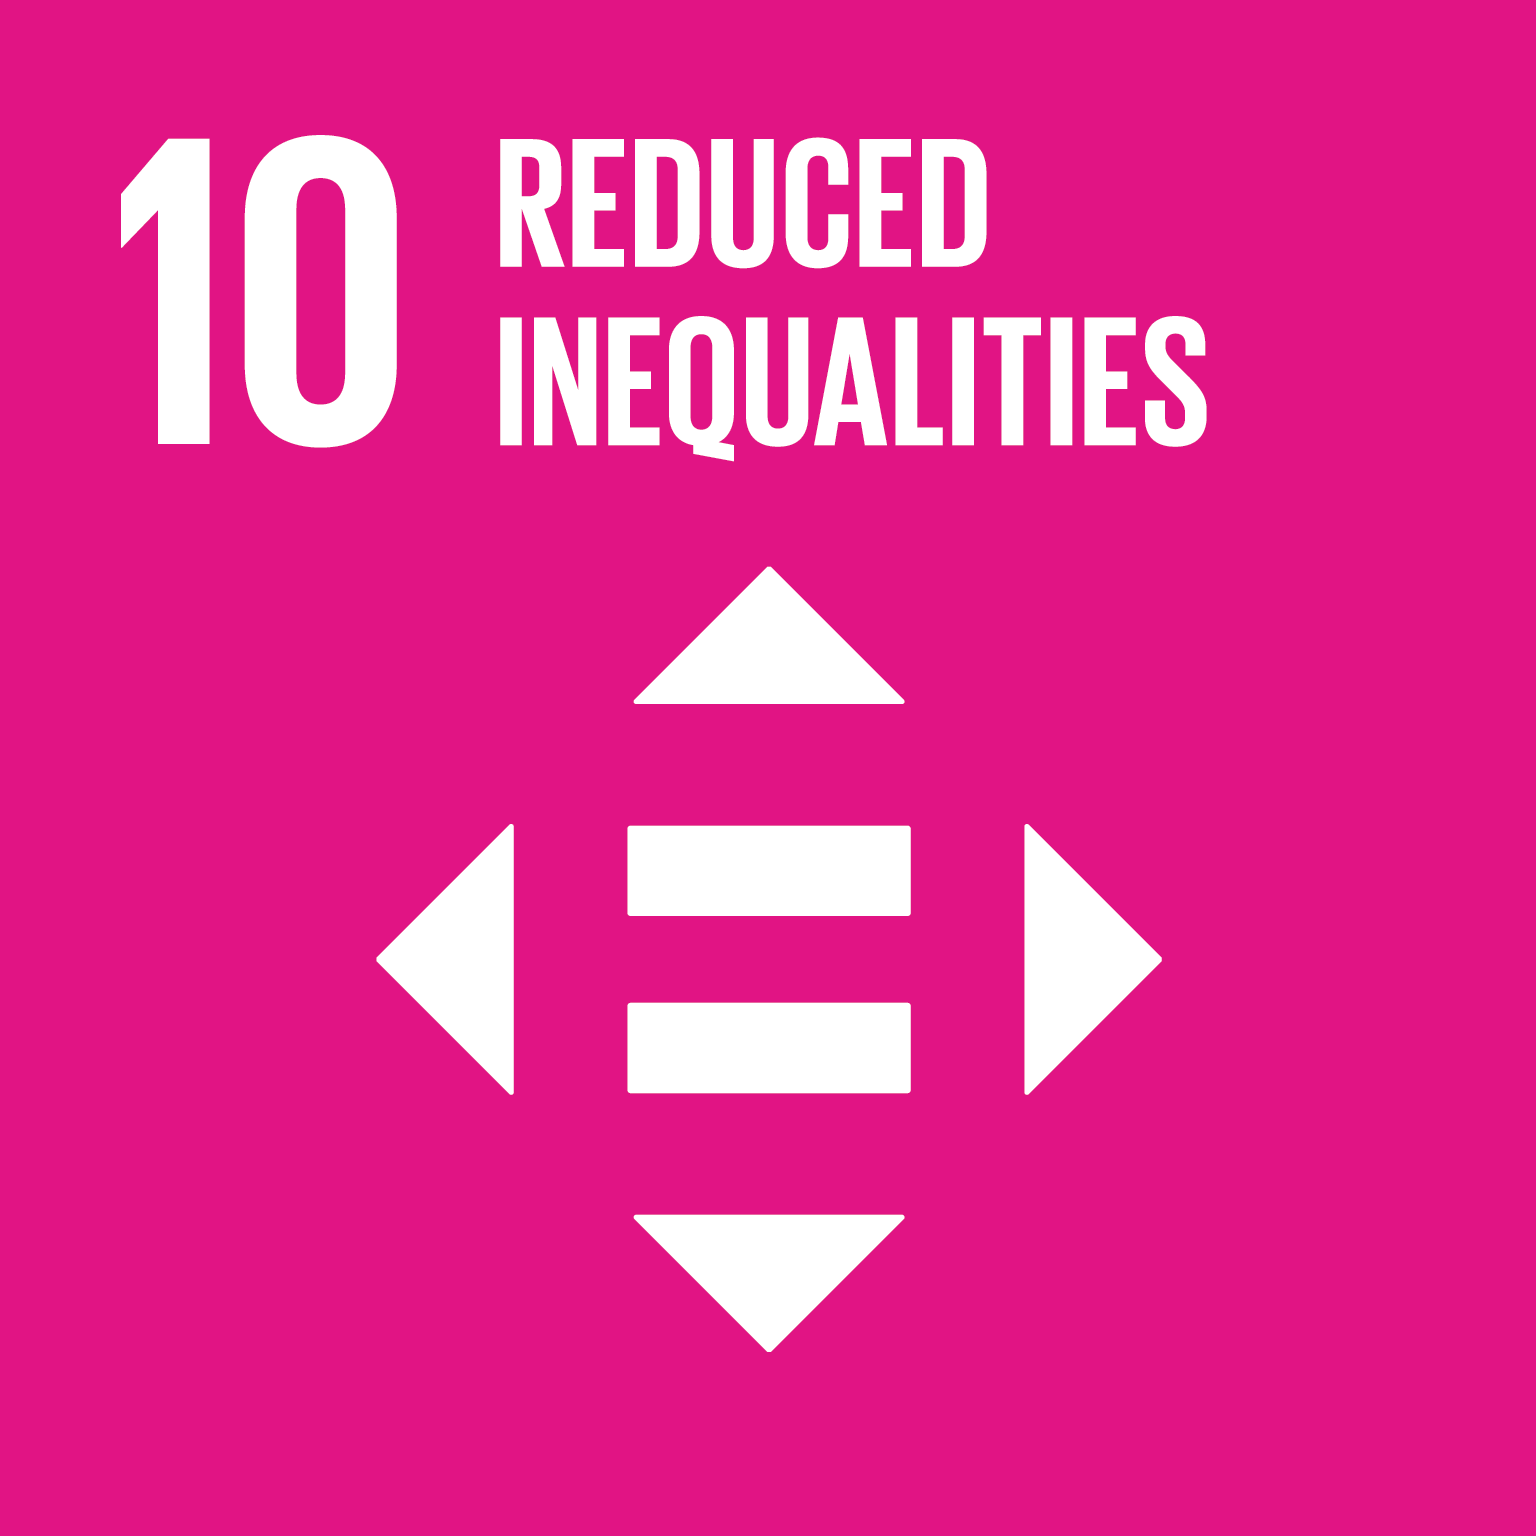 Goal 10: Reduced Inequalities - Reduce inequality within and among countries